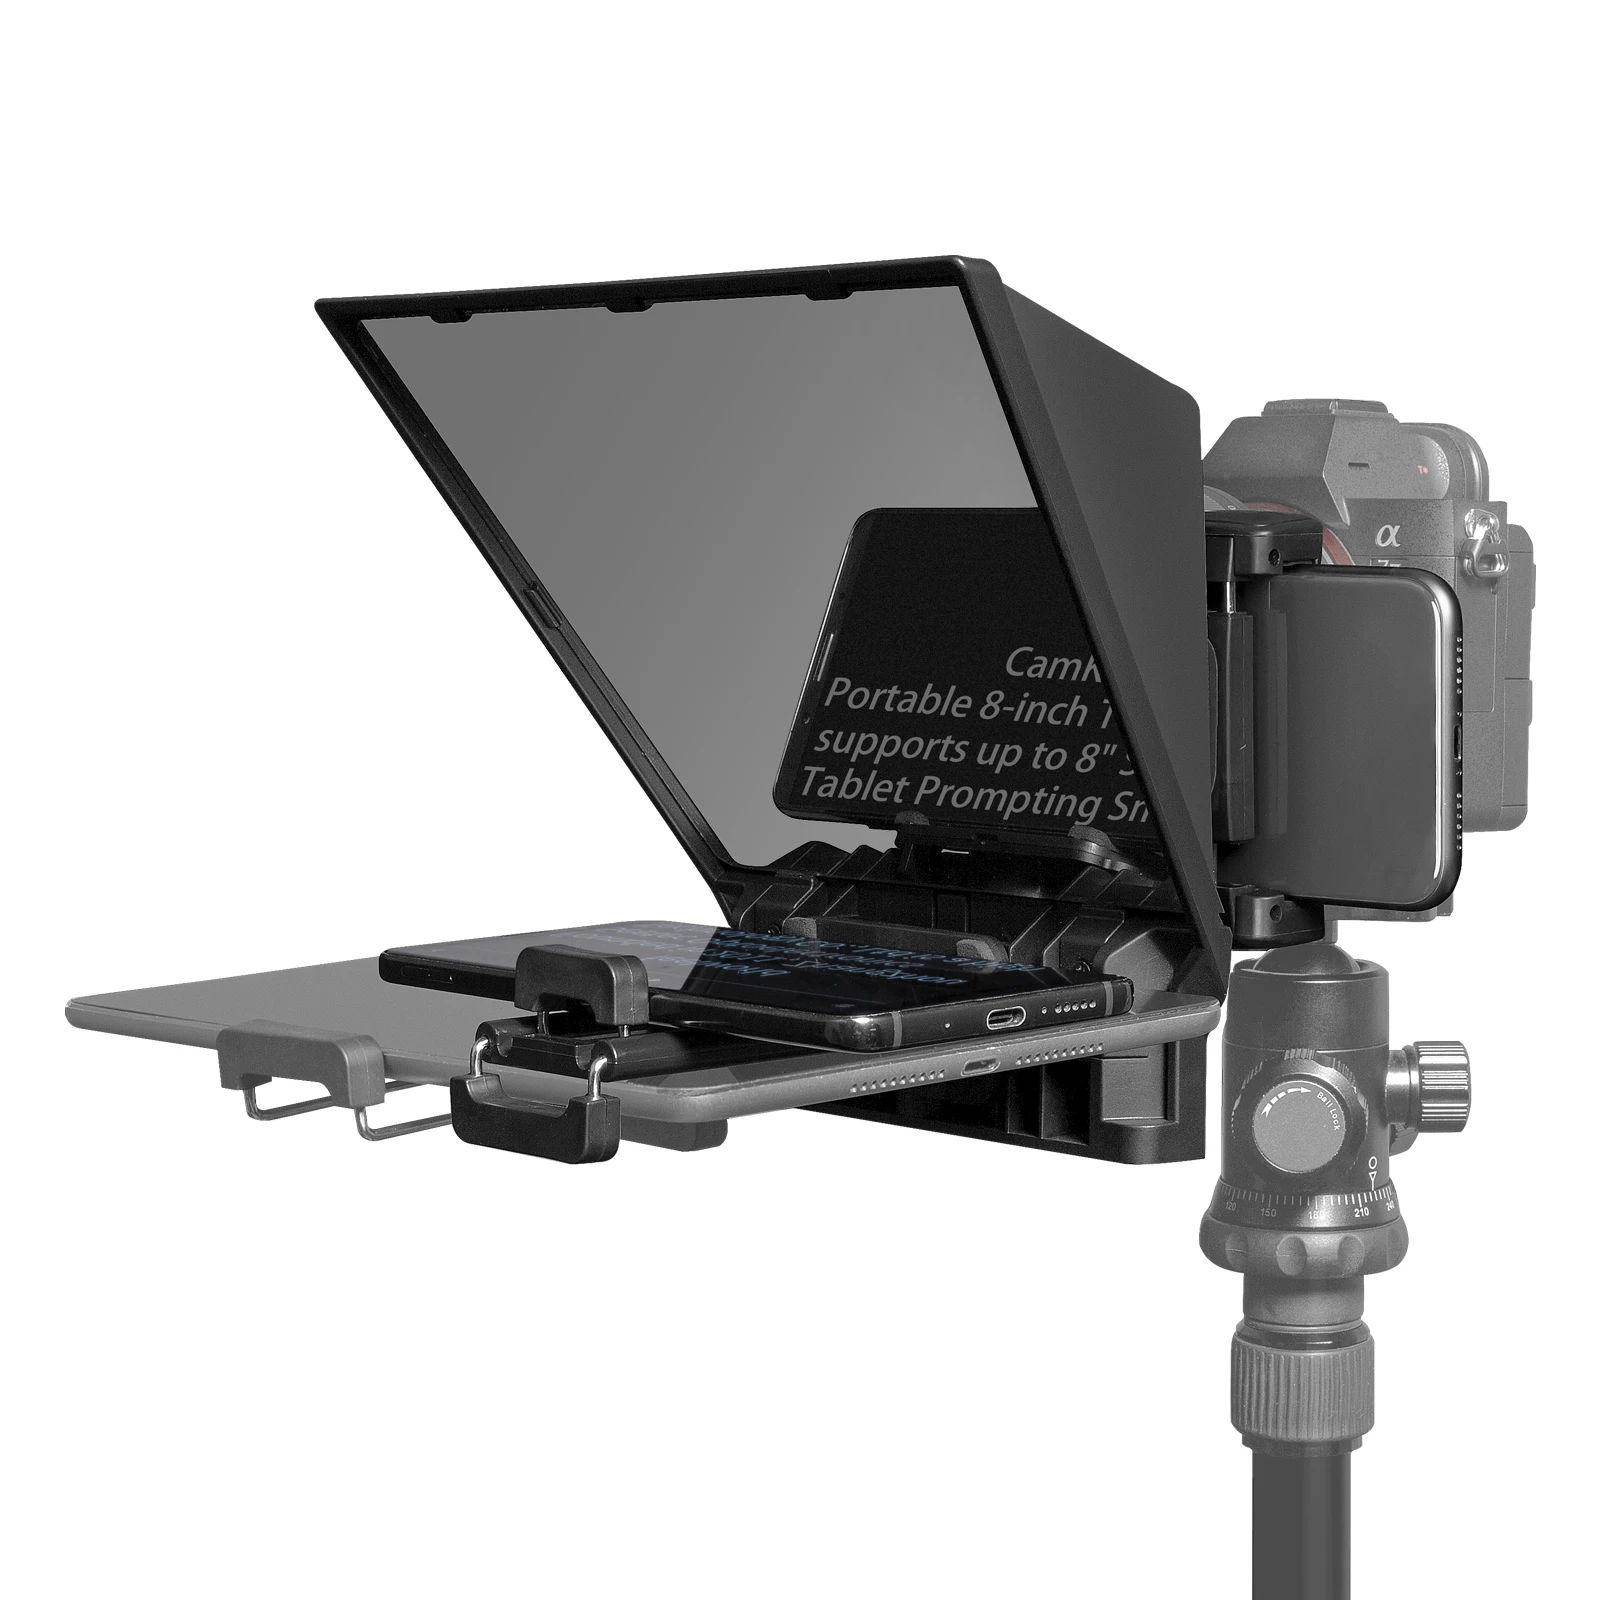 

Camkoo Phone and DSLR Recording Mini Teleprompter Portable Inscriber Mobile Teleprompter Artifact Video With Remote Control